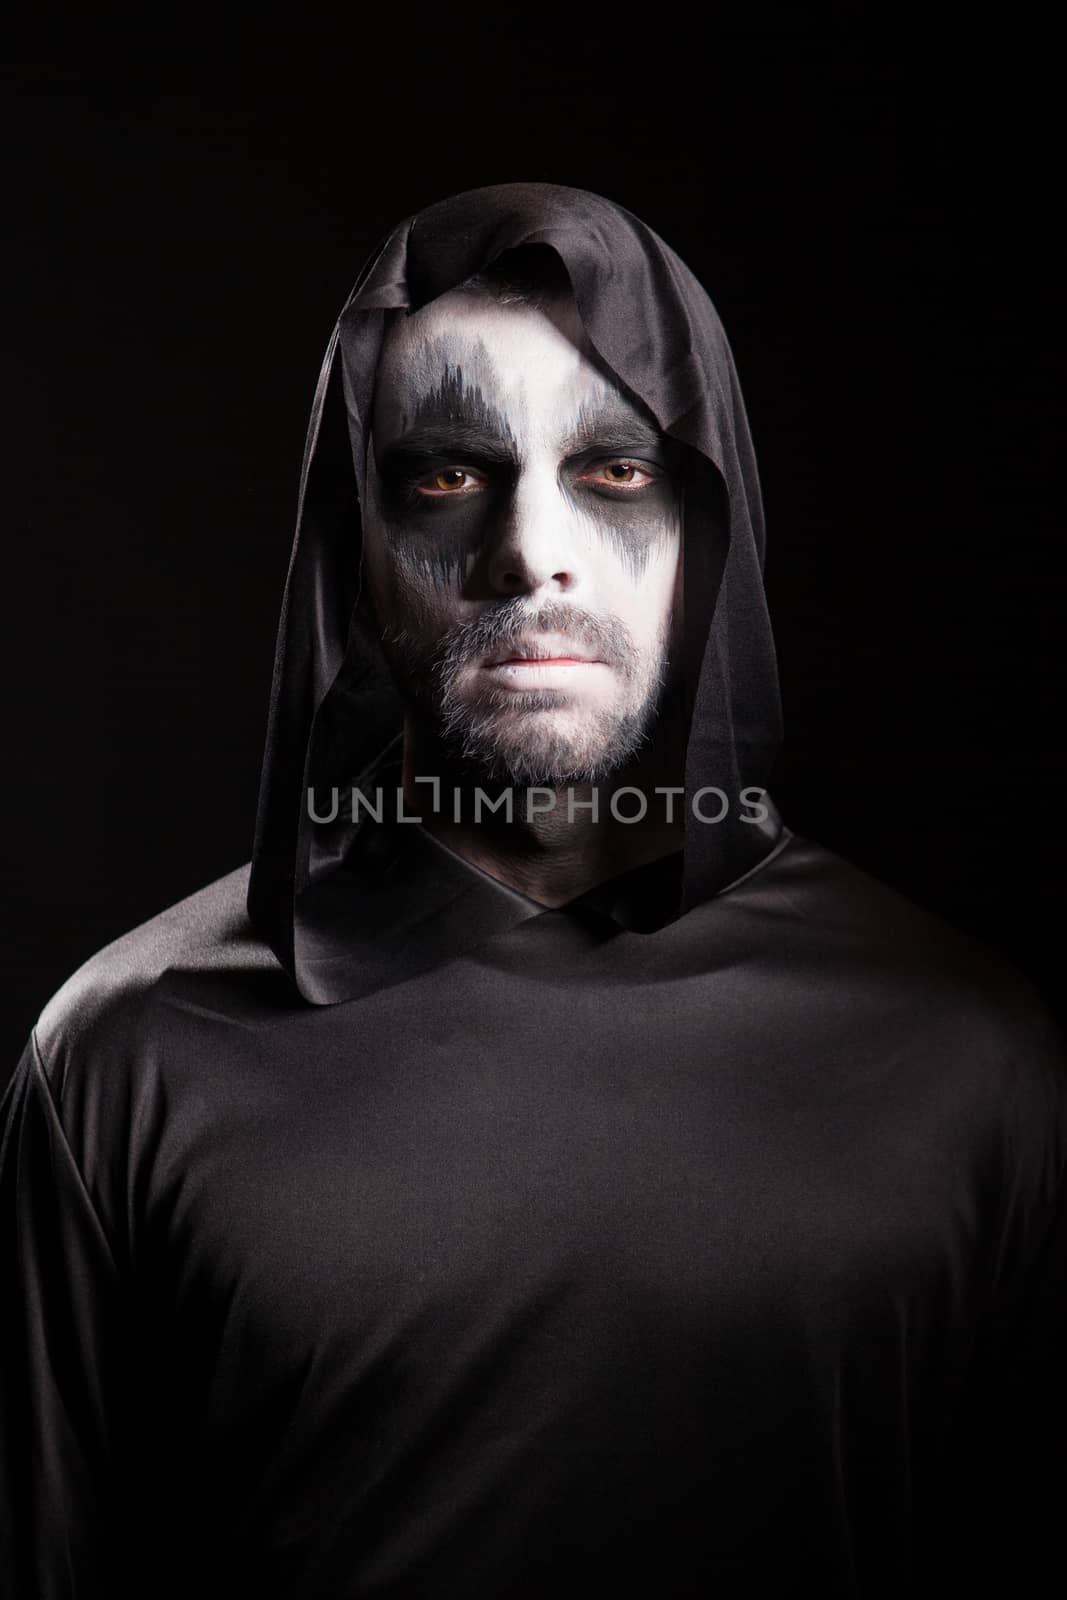 Grim reaper with a hood isolated over black background by DCStudio